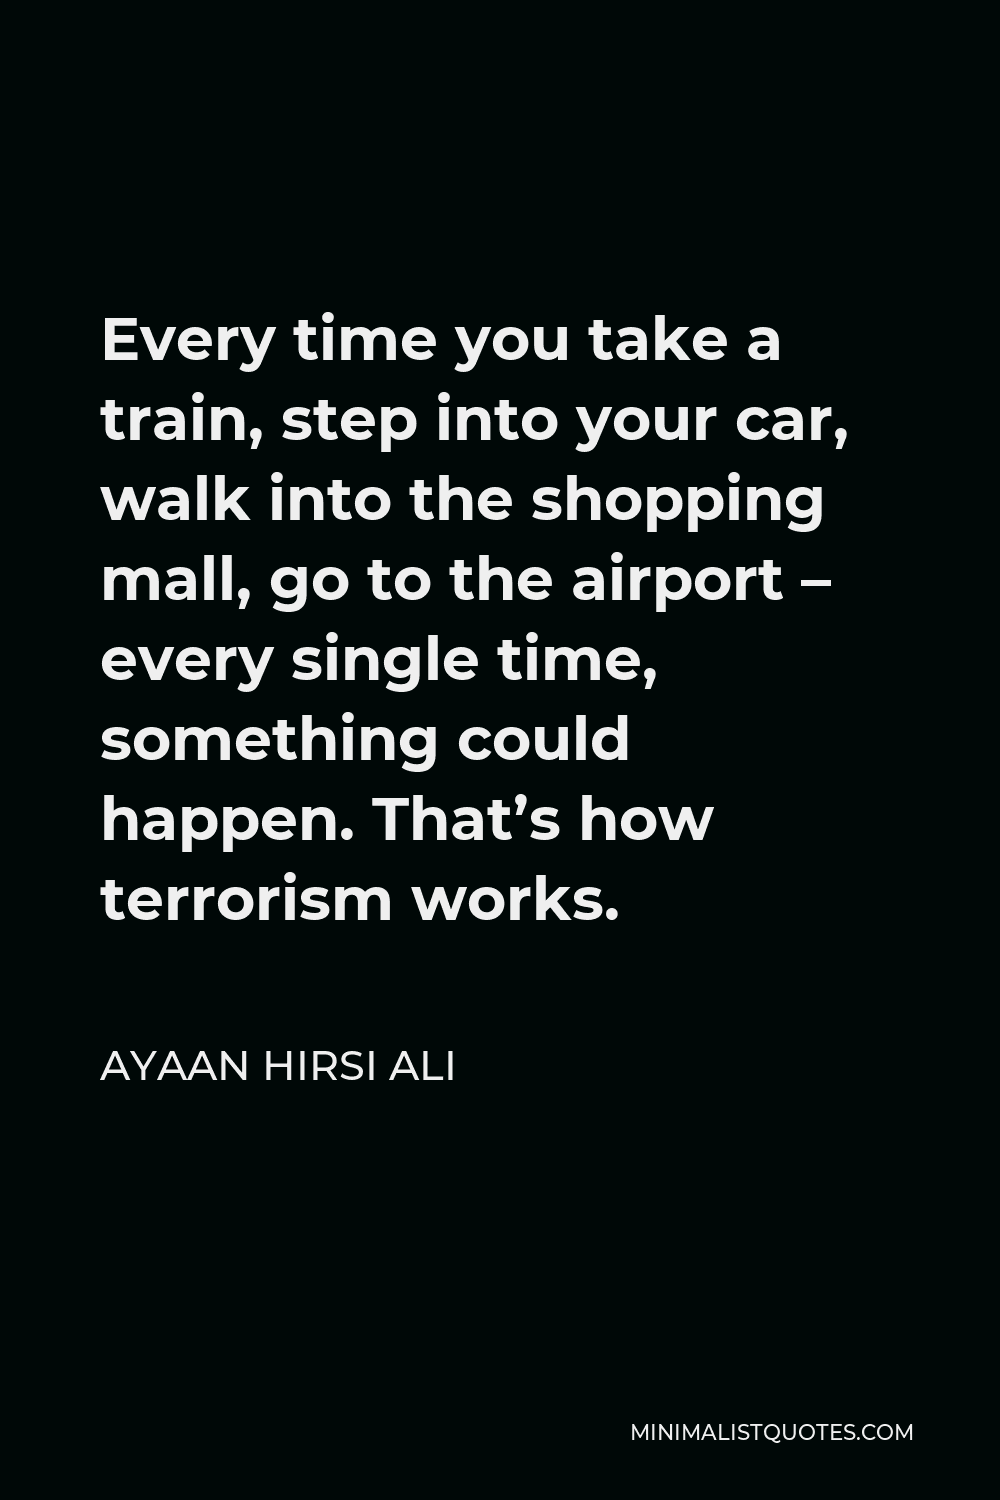 Ayaan Hirsi Ali Quote - Every time you take a train, step into your car, walk into the shopping mall, go to the airport – every single time, something could happen. That’s how terrorism works.